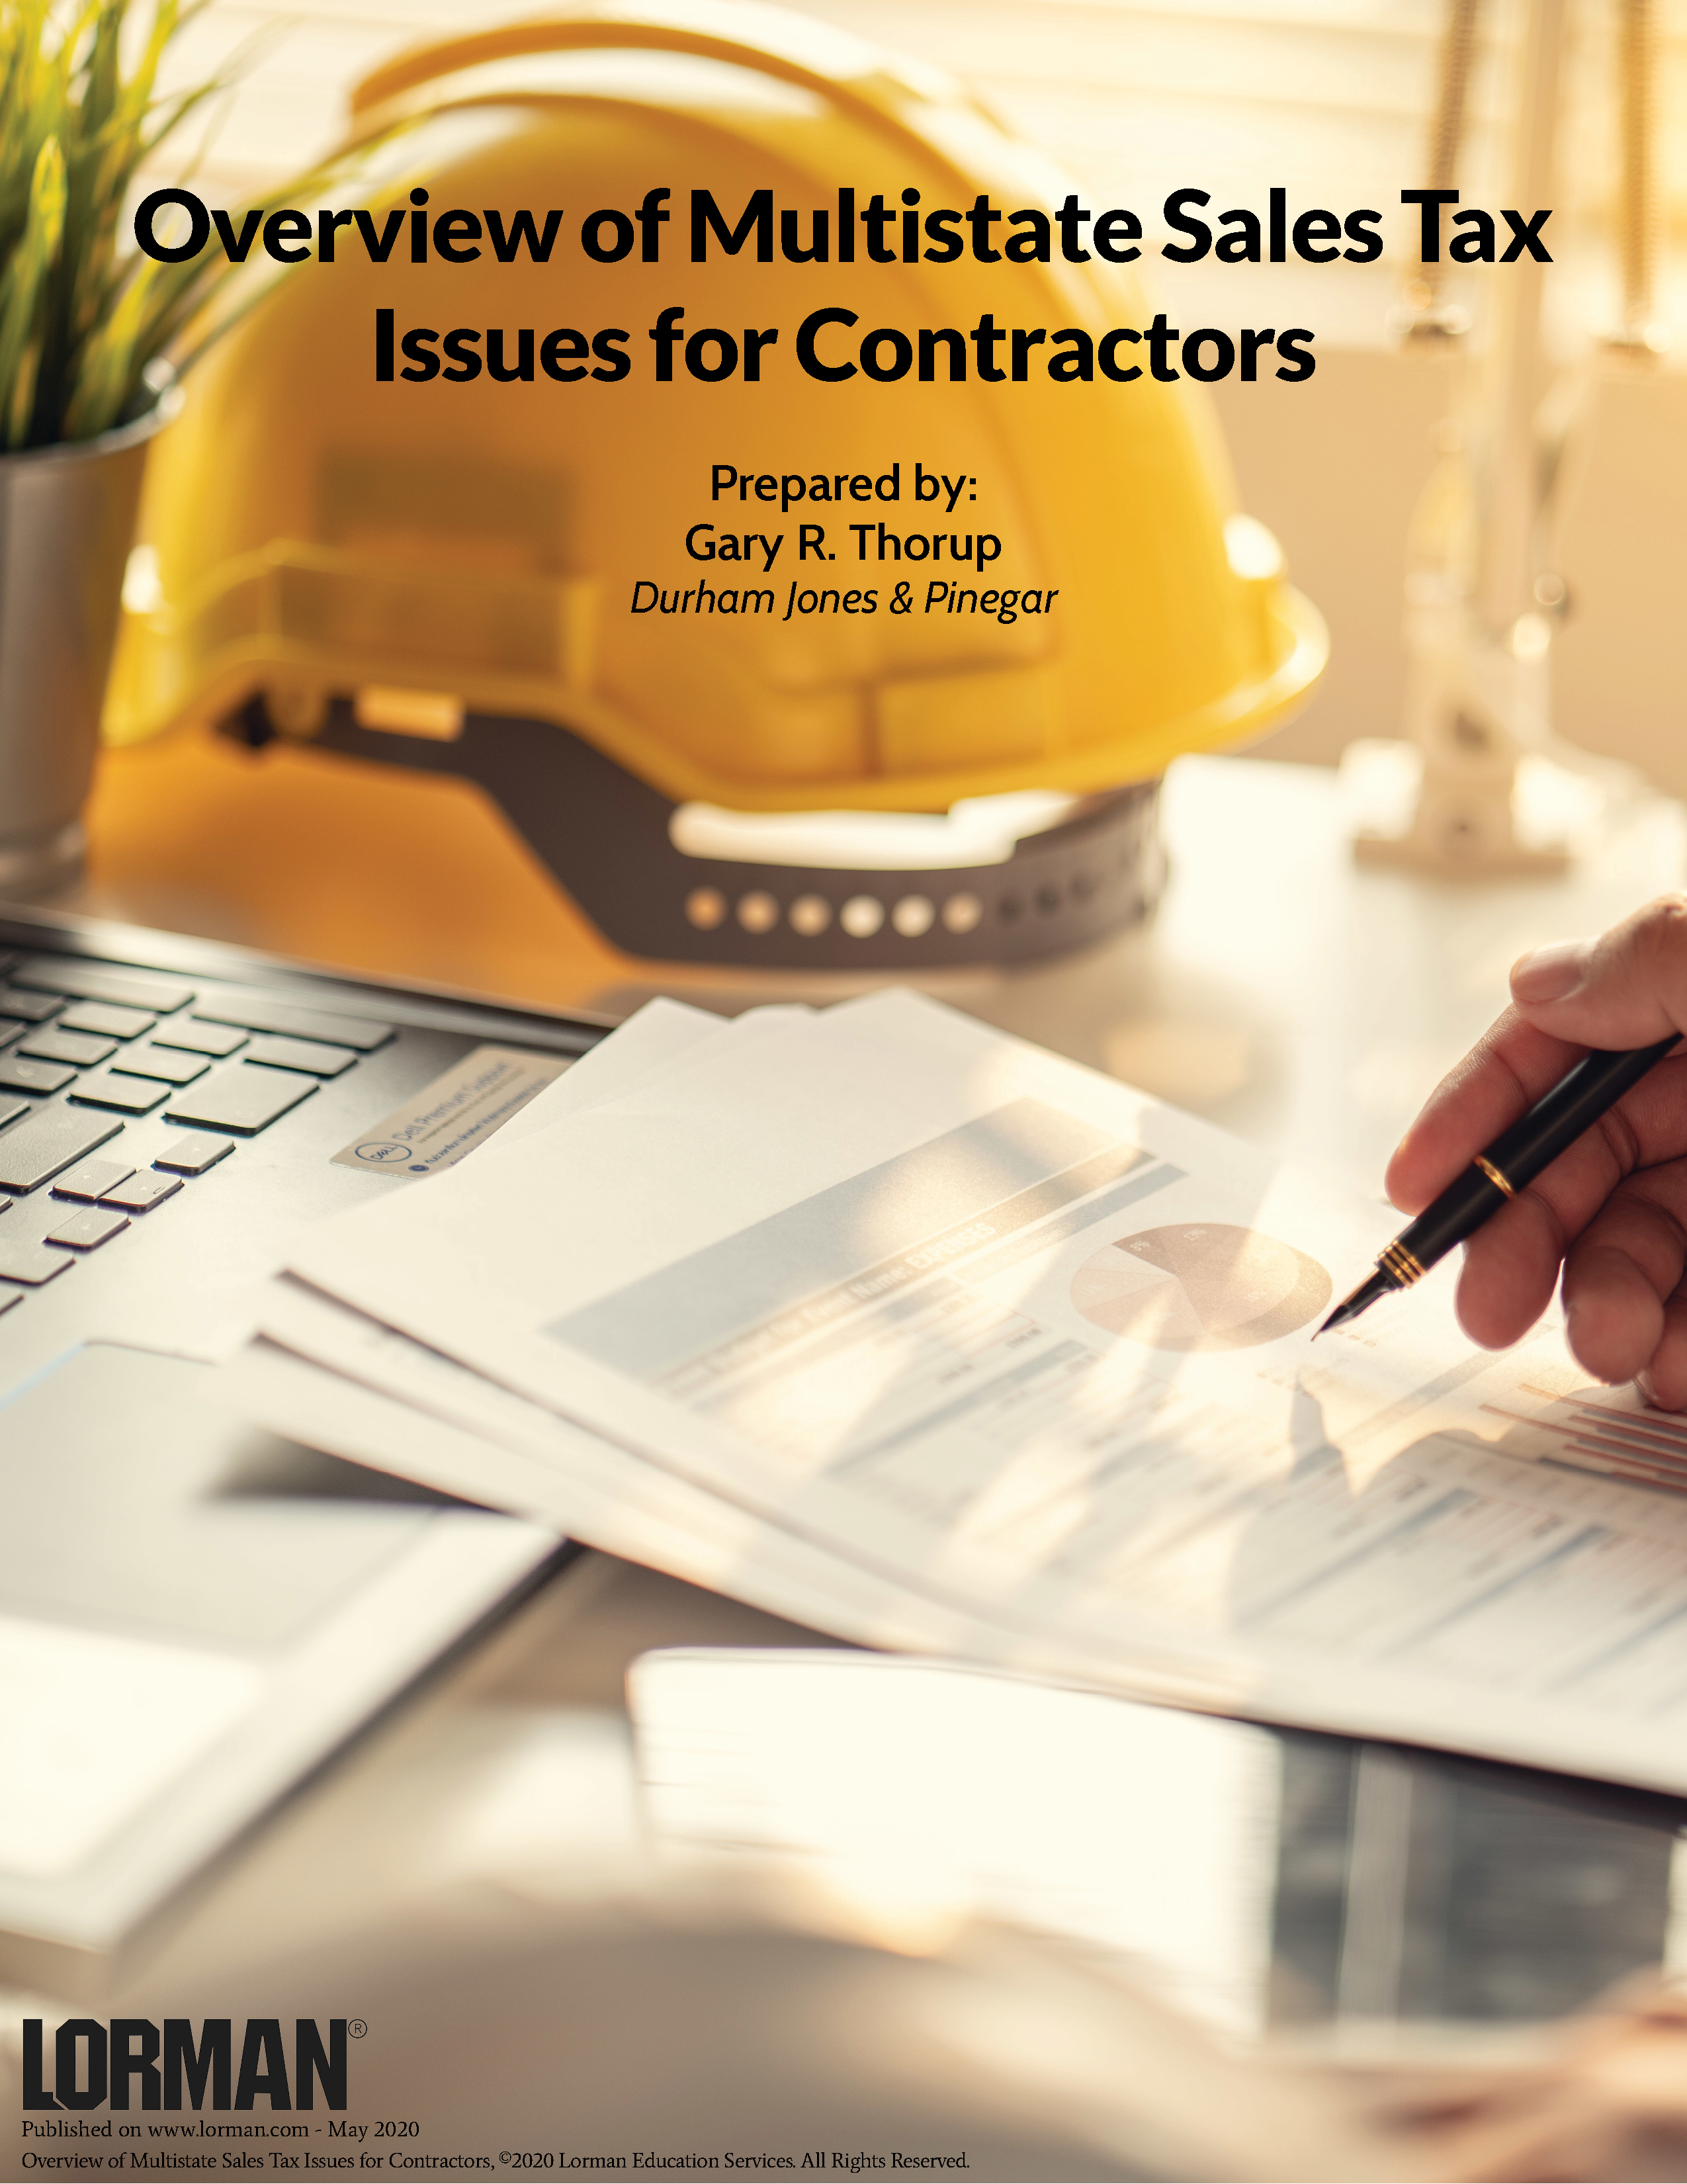 Overview of Multistate Sales Tax Issues for Contractors